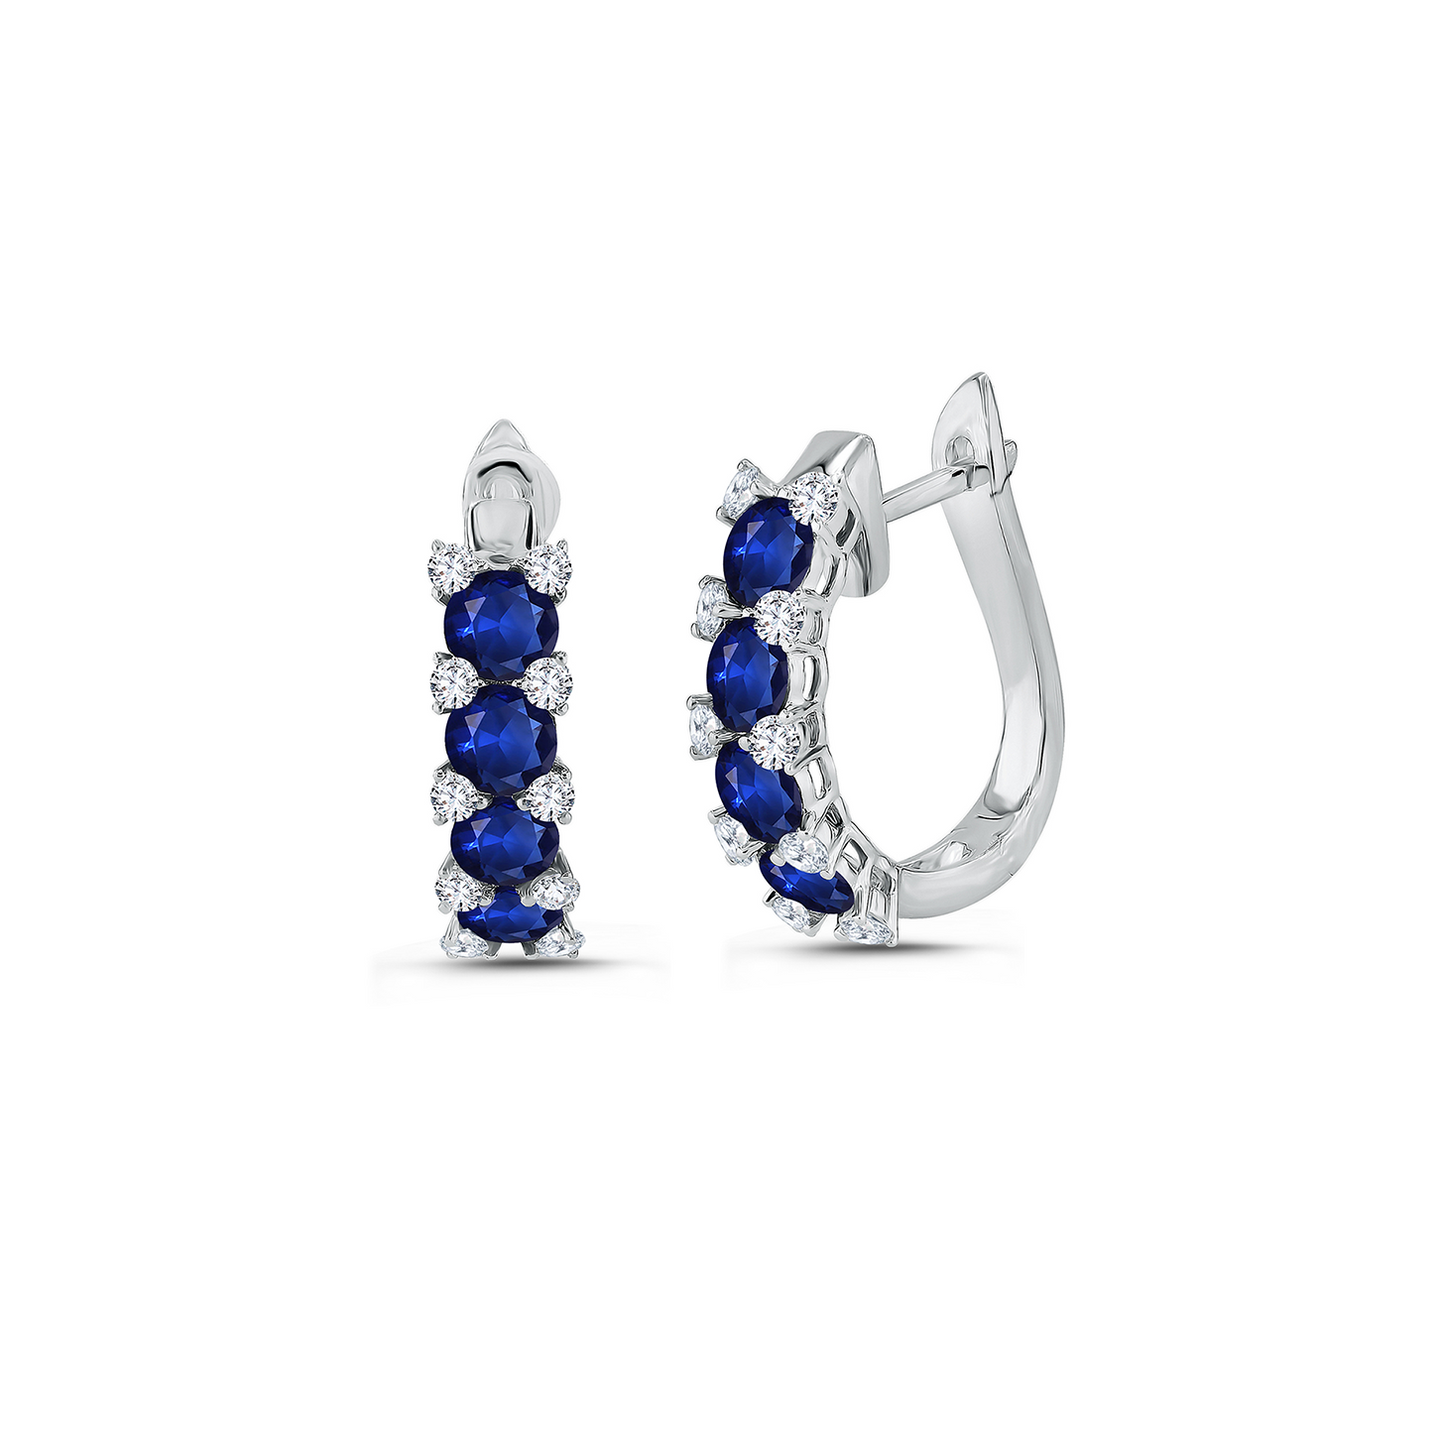 Sabel Collection White Gold Round Sapphire and Diamond Hoop Earrings